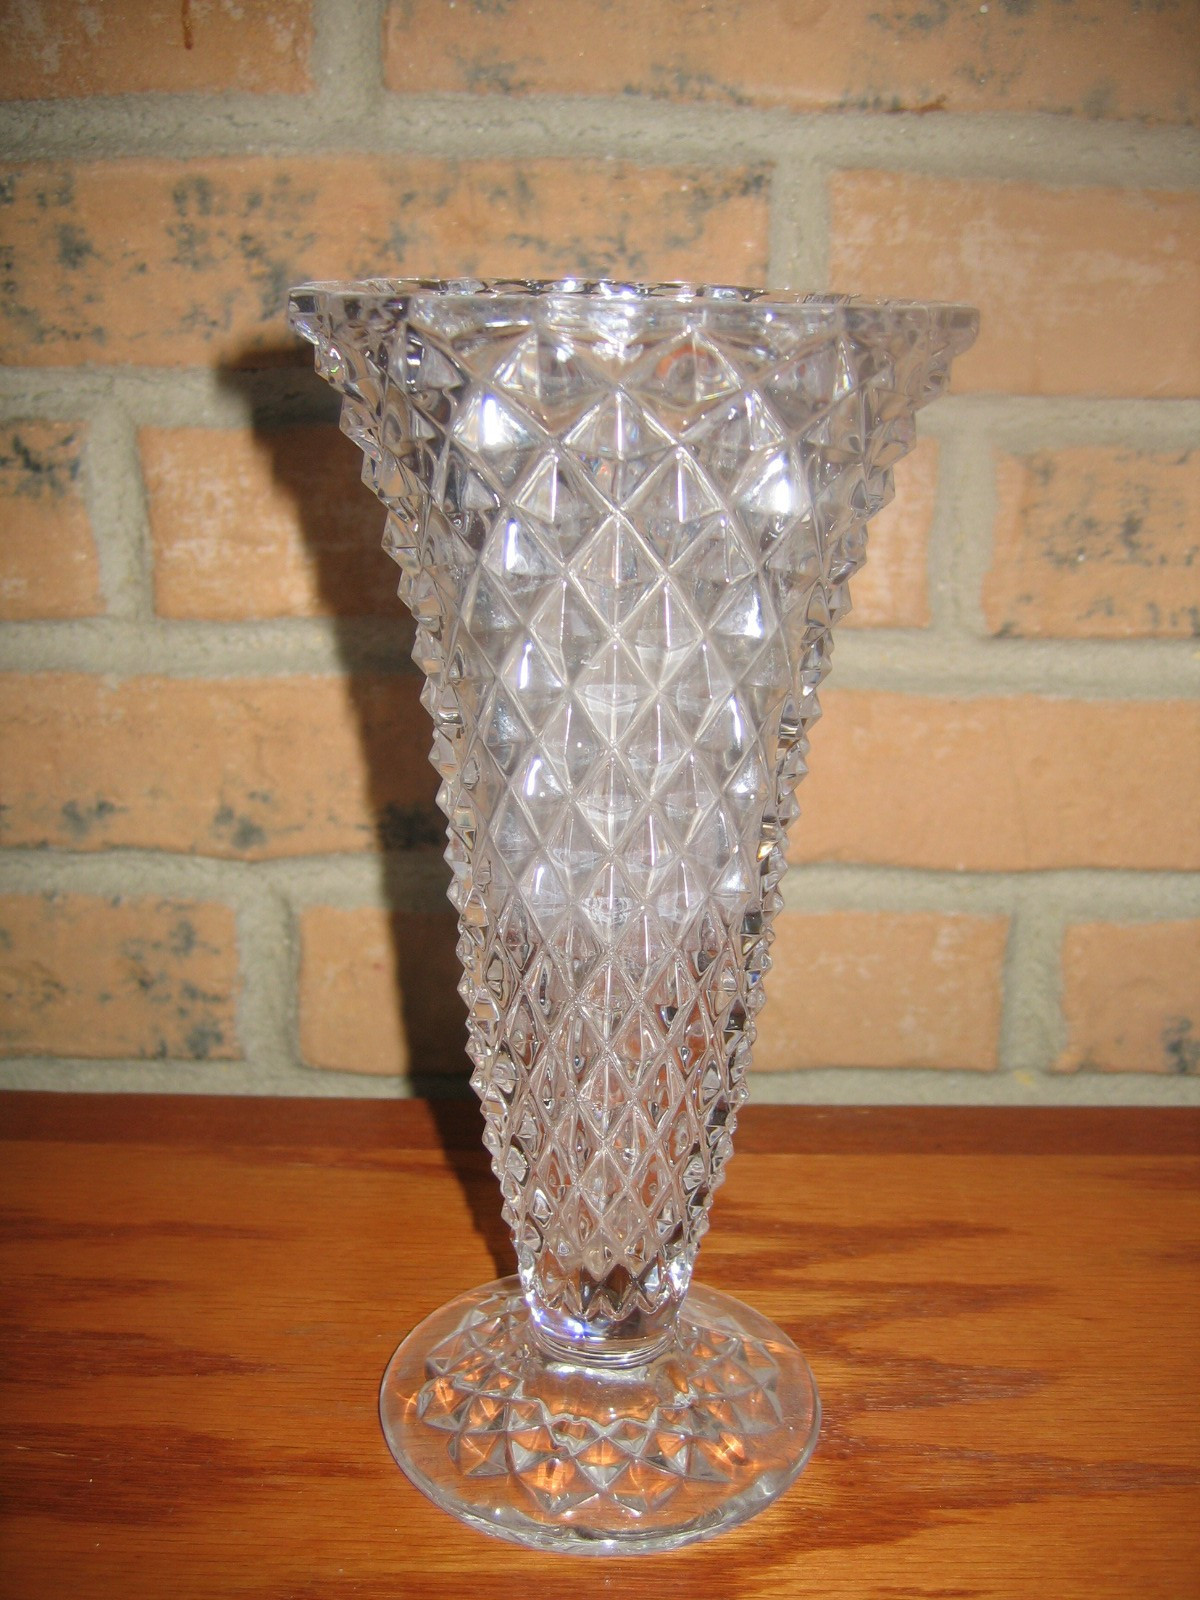 18 Wonderful Czech Crystal Vase 2024 free download czech crystal vase of lead crystal vases pics glass vase decoration ideas will clipart intended for glass vase decoration ideas will clipart colored flower vase clip